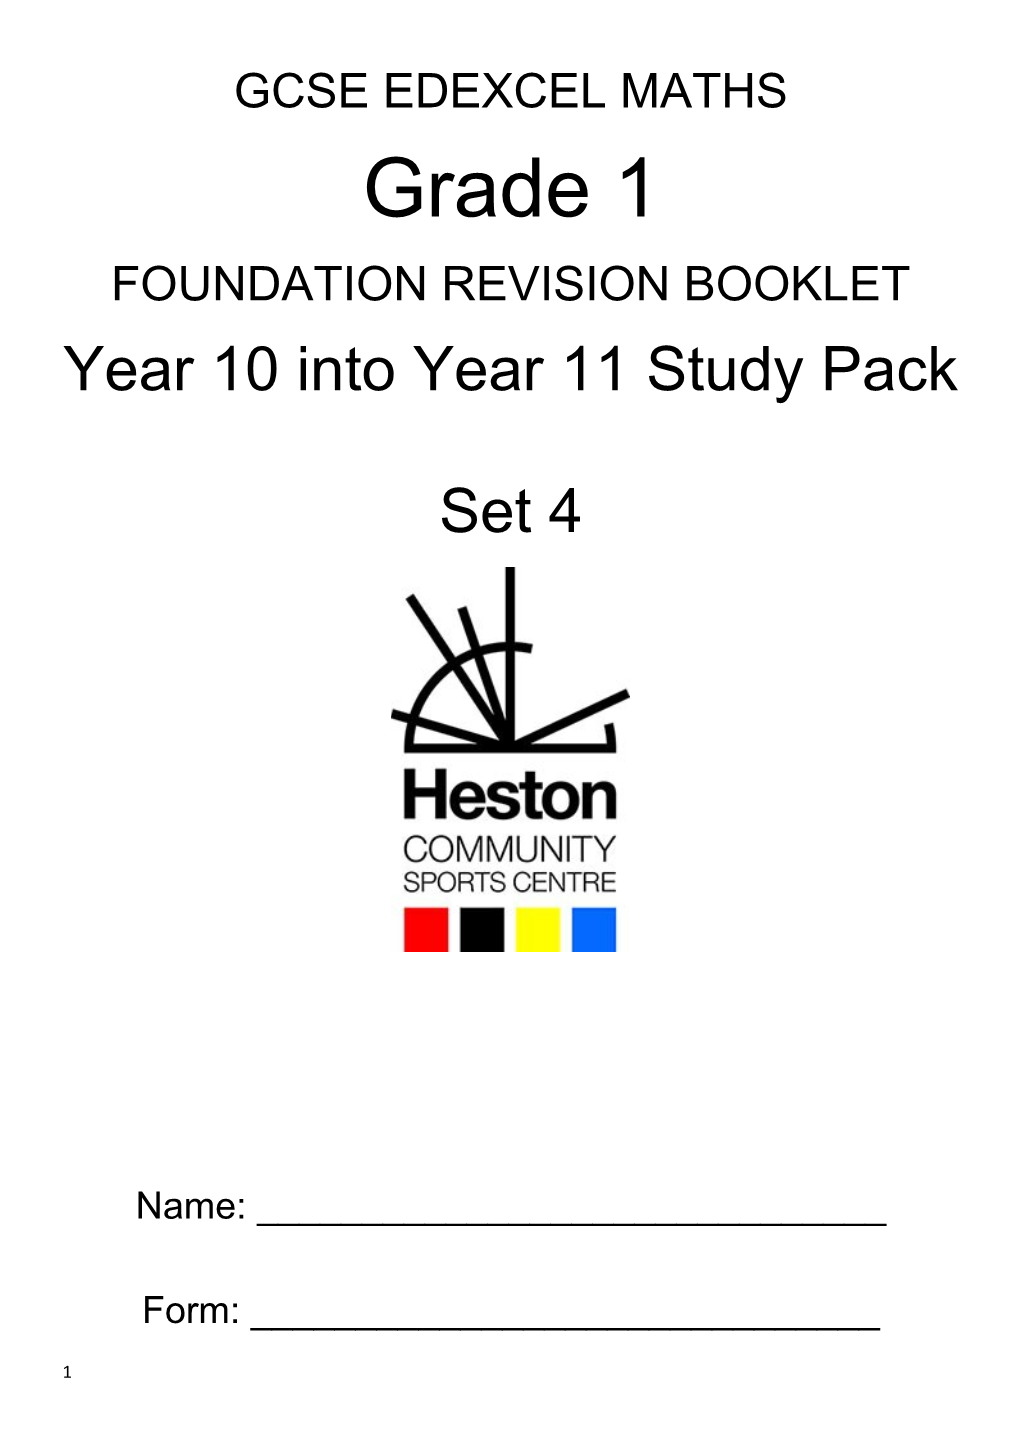 Year 10 Into Year 11 Study Pack